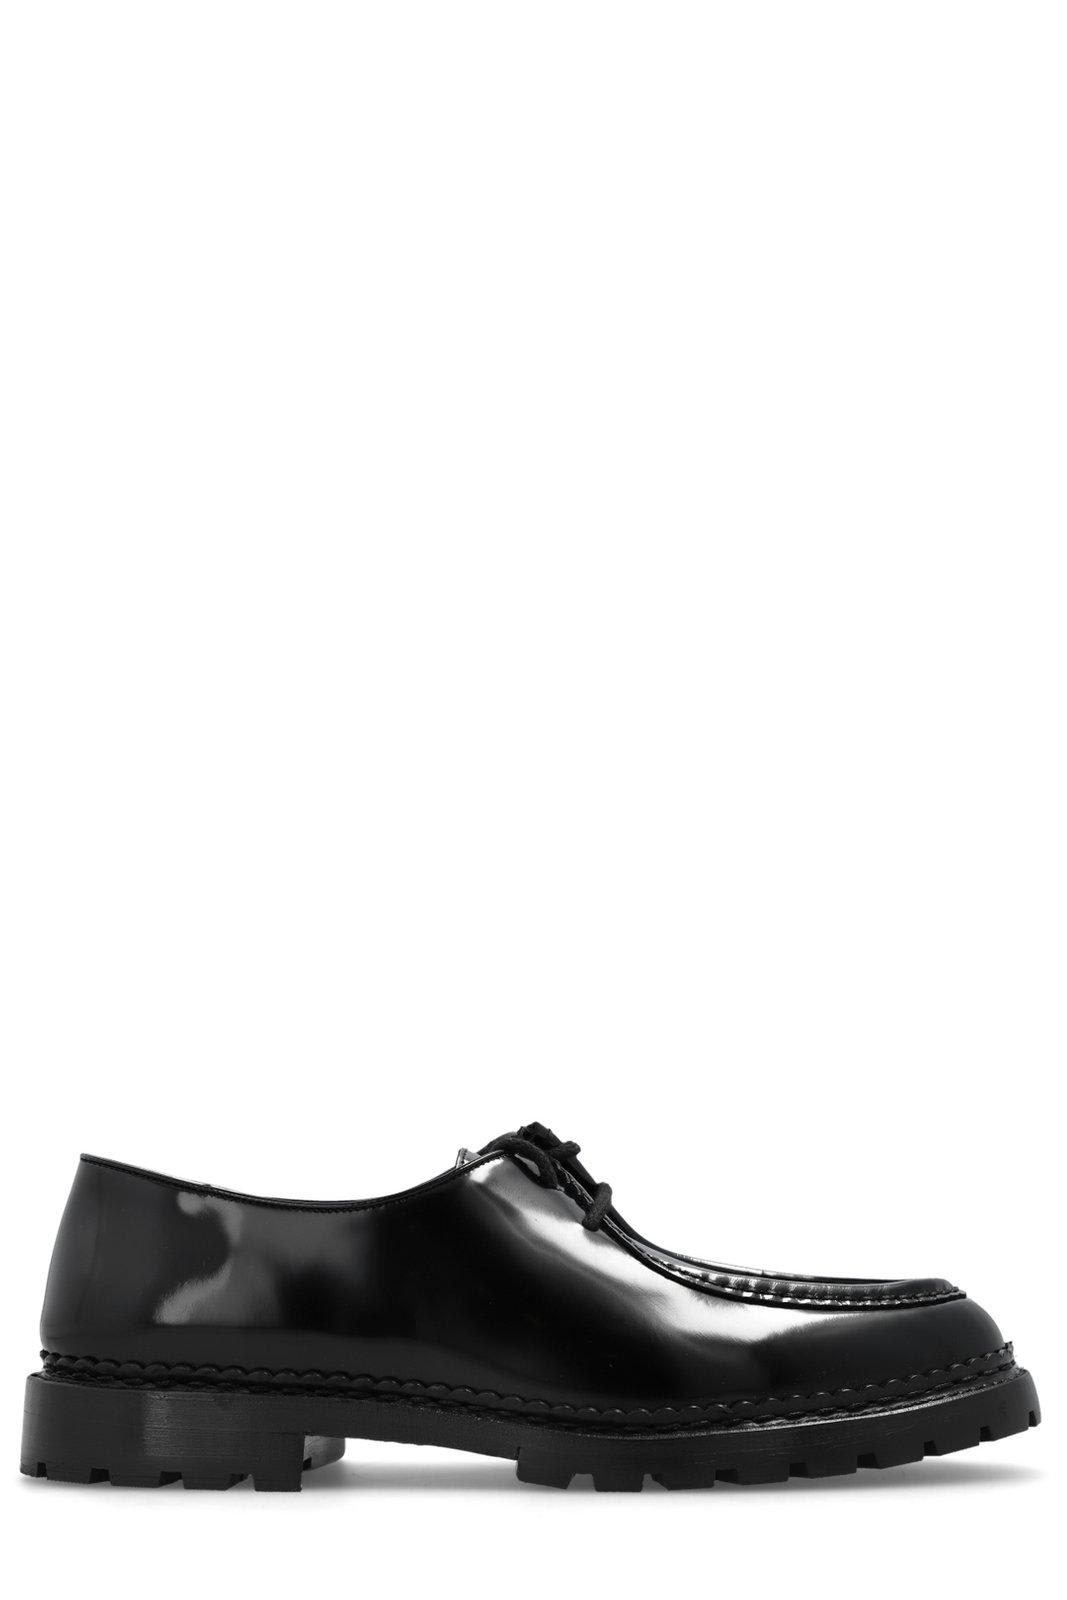 SAINT LAURENT MARBEUF LACE-UP LOAFERS